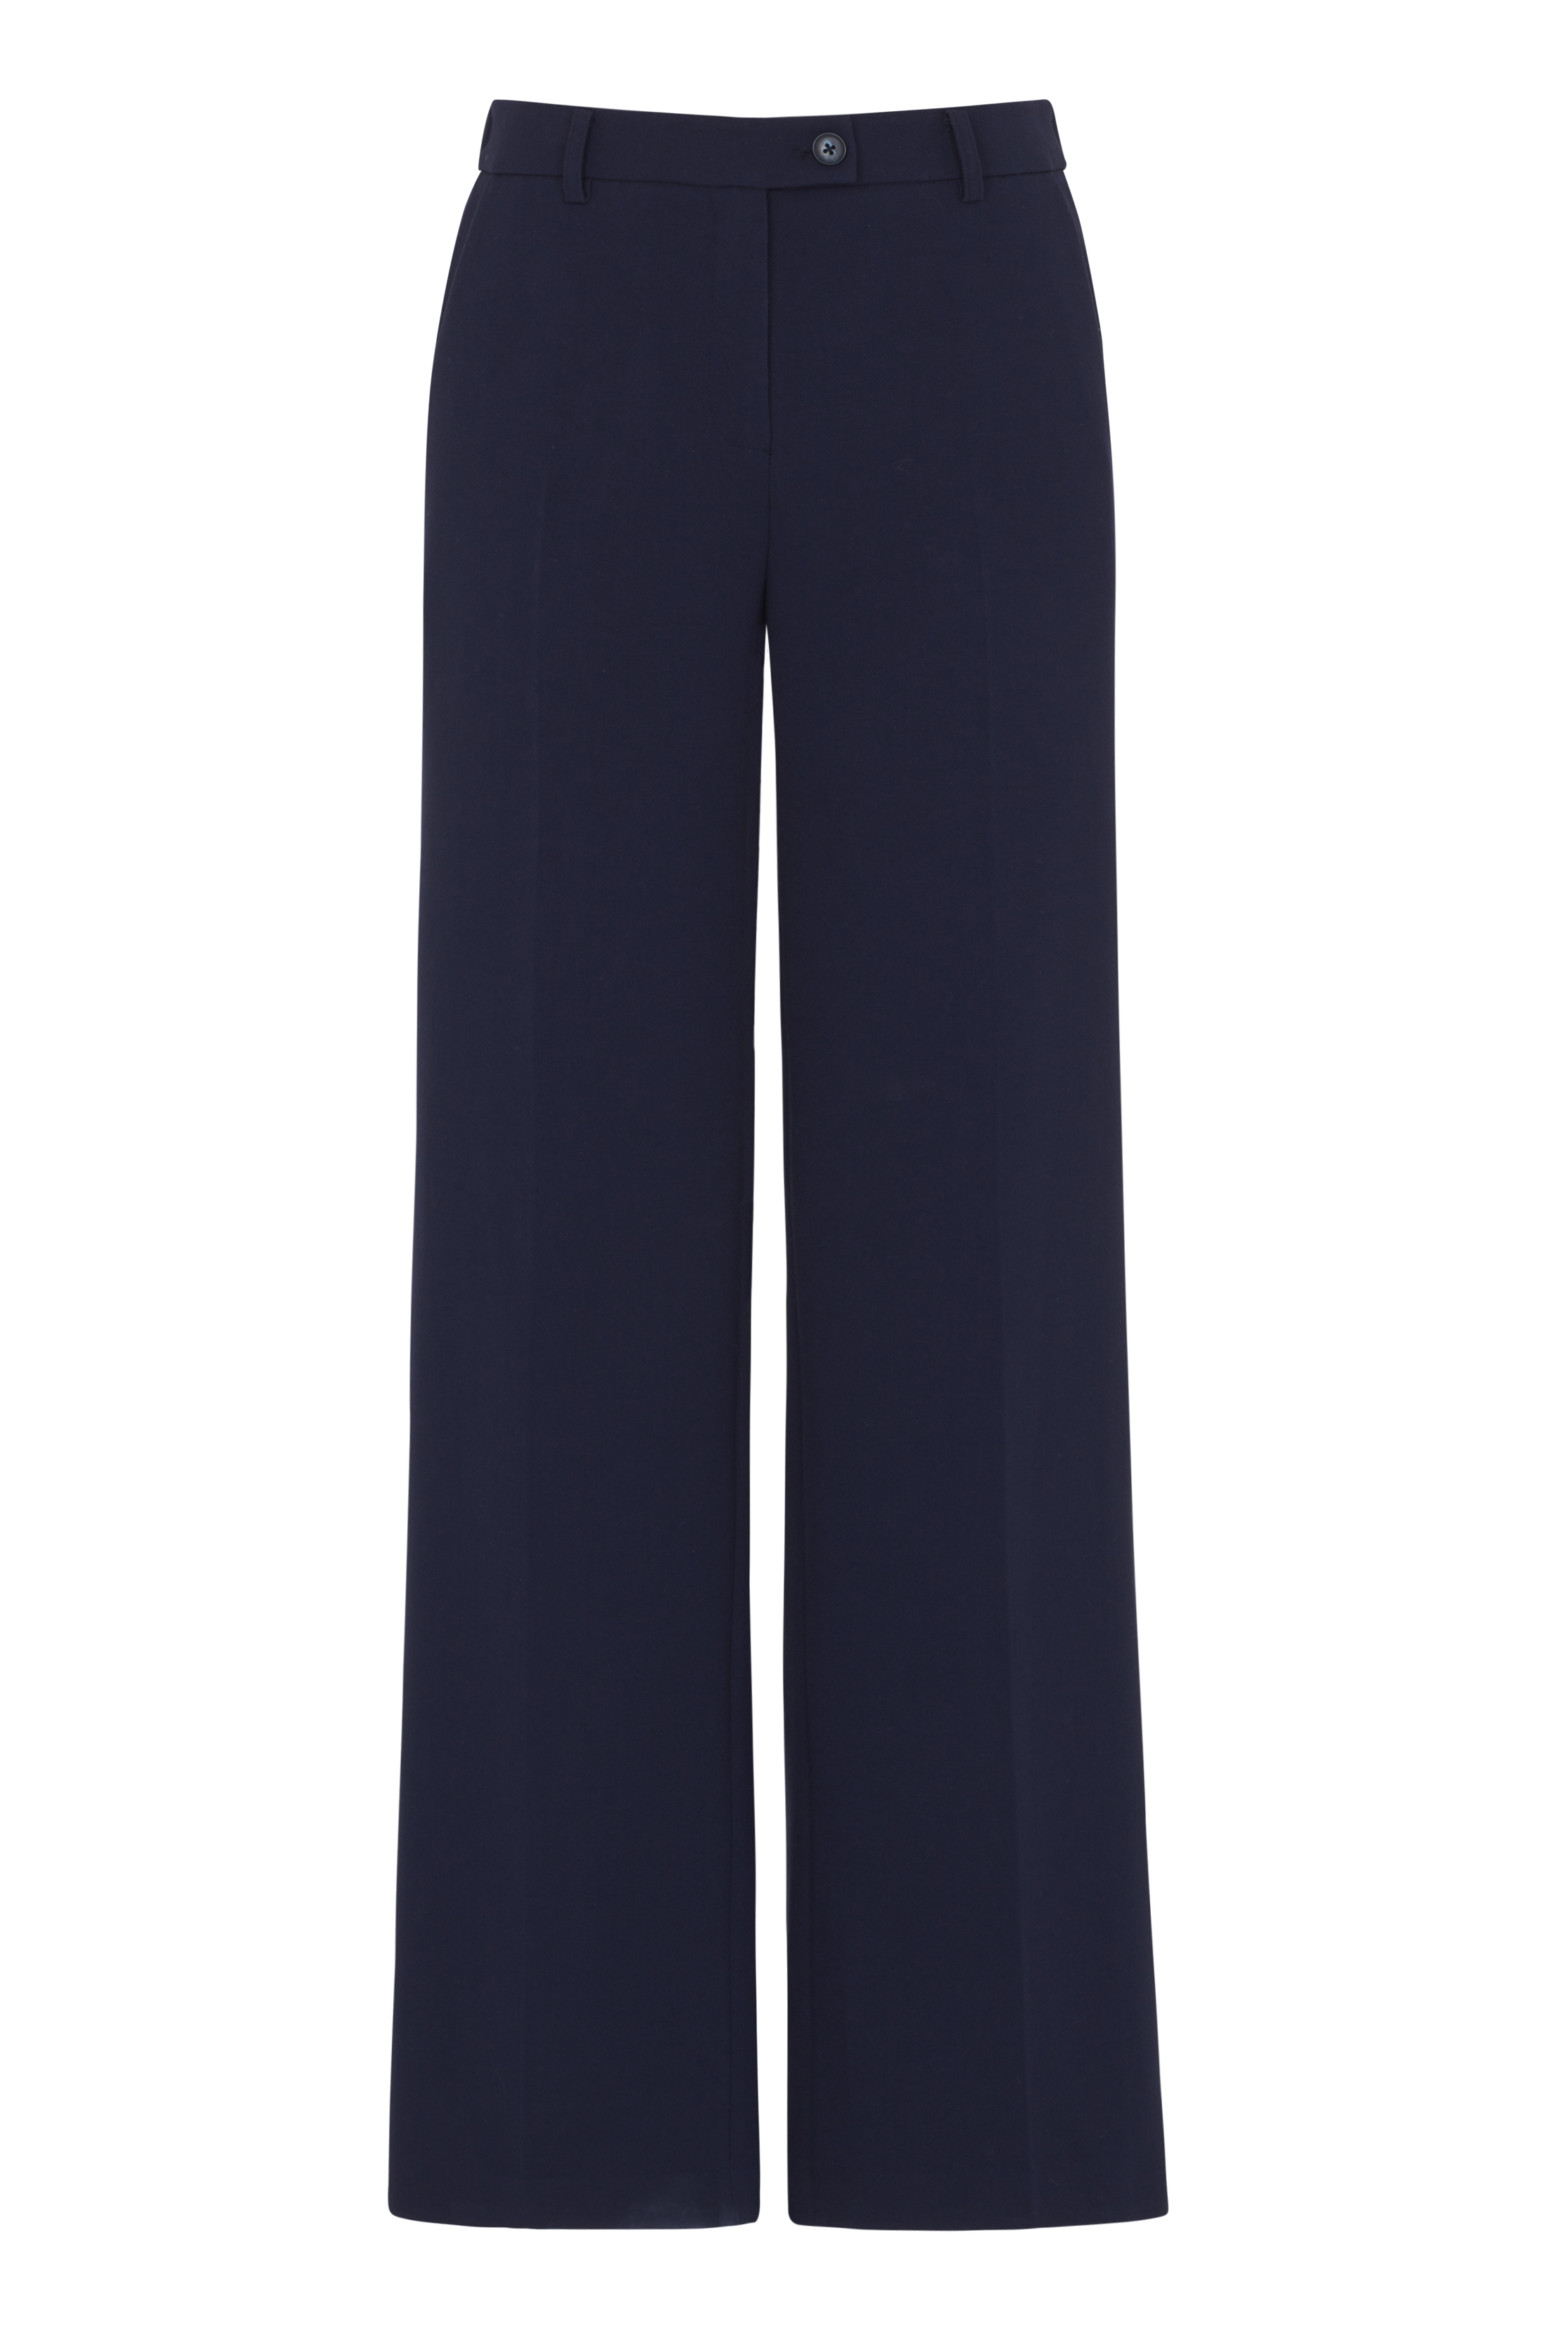 Navy Double Faced Wide Leg Trousers | Long Tall Sally